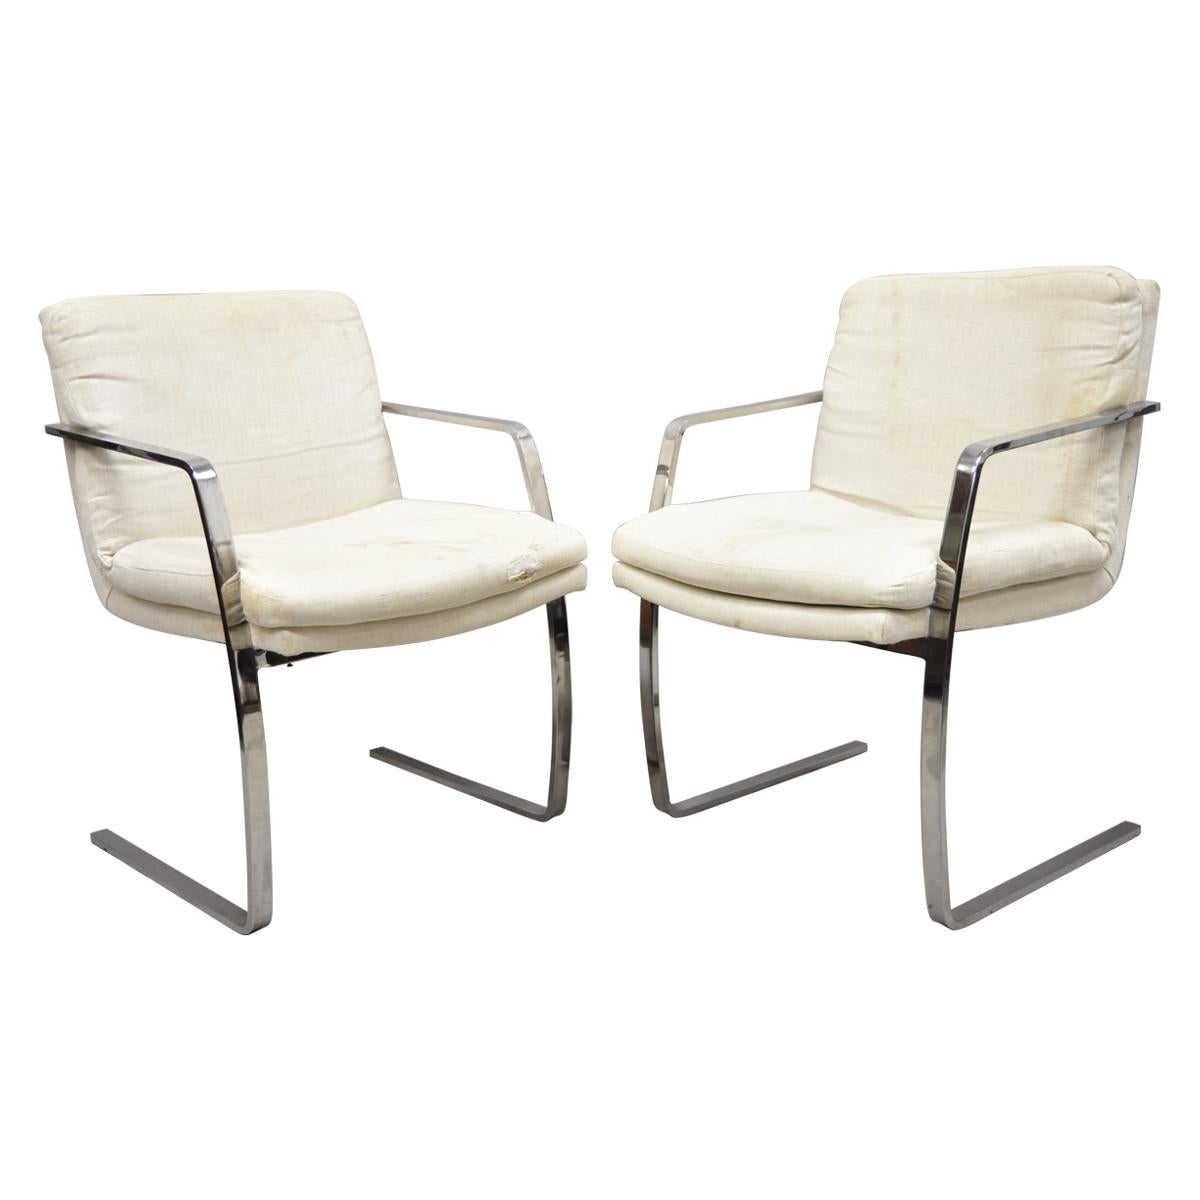 Mid-Century Modern BRNO Style Chrome Cantilever Lounge Armchairs 'A', a Pair For Sale